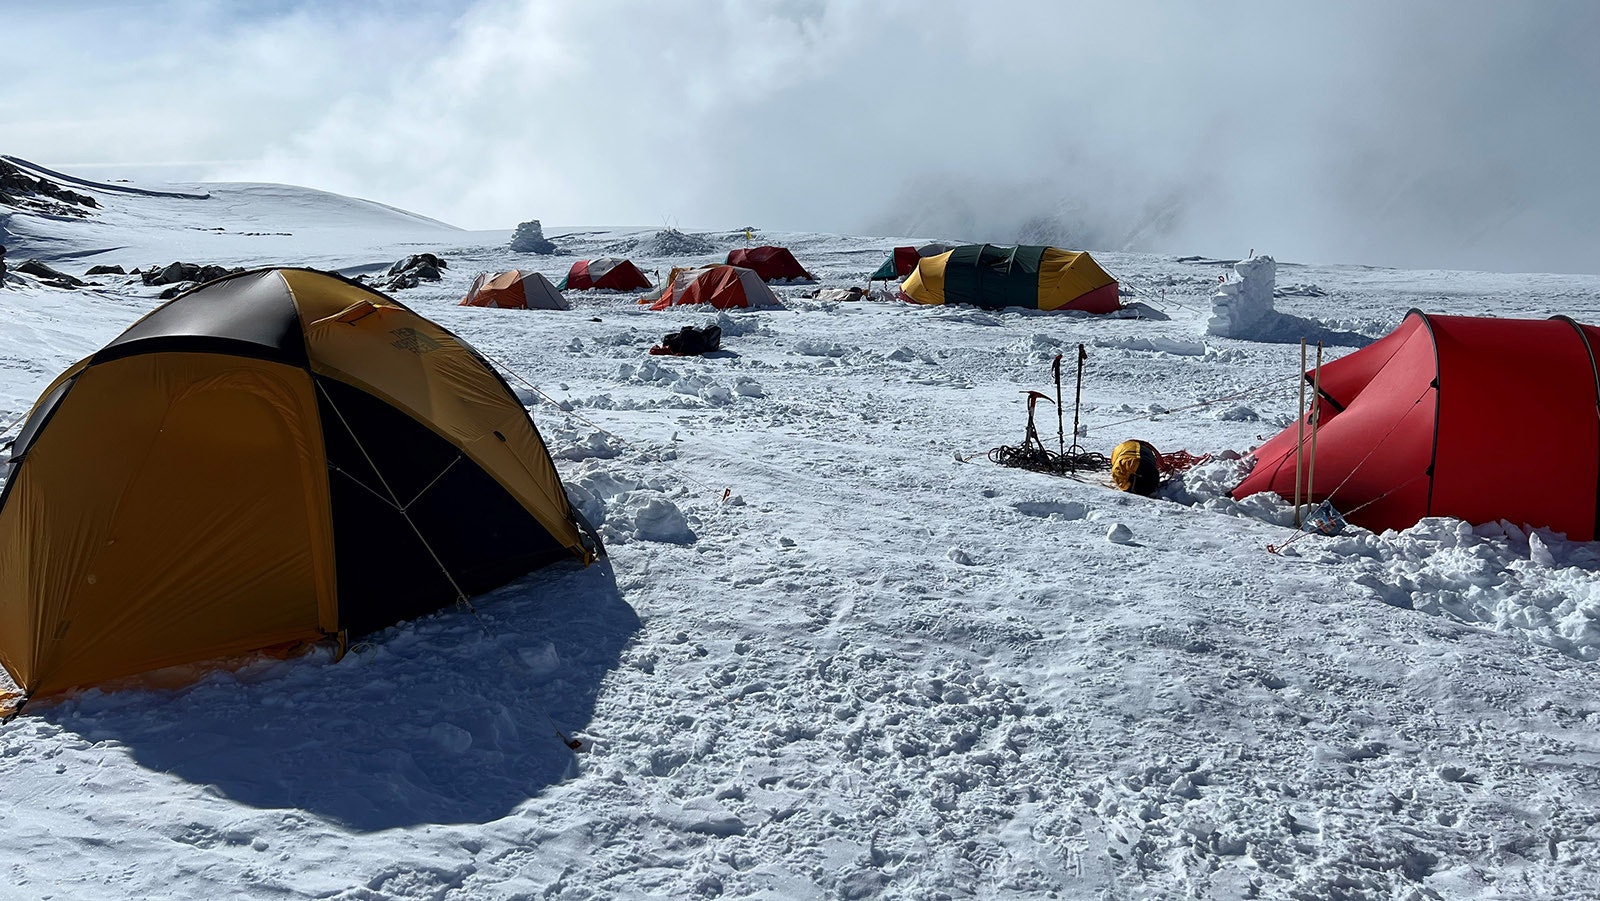 Climbers on Mount Vinson are required to be completely self-sufficient. Here is a climbers’ camp.